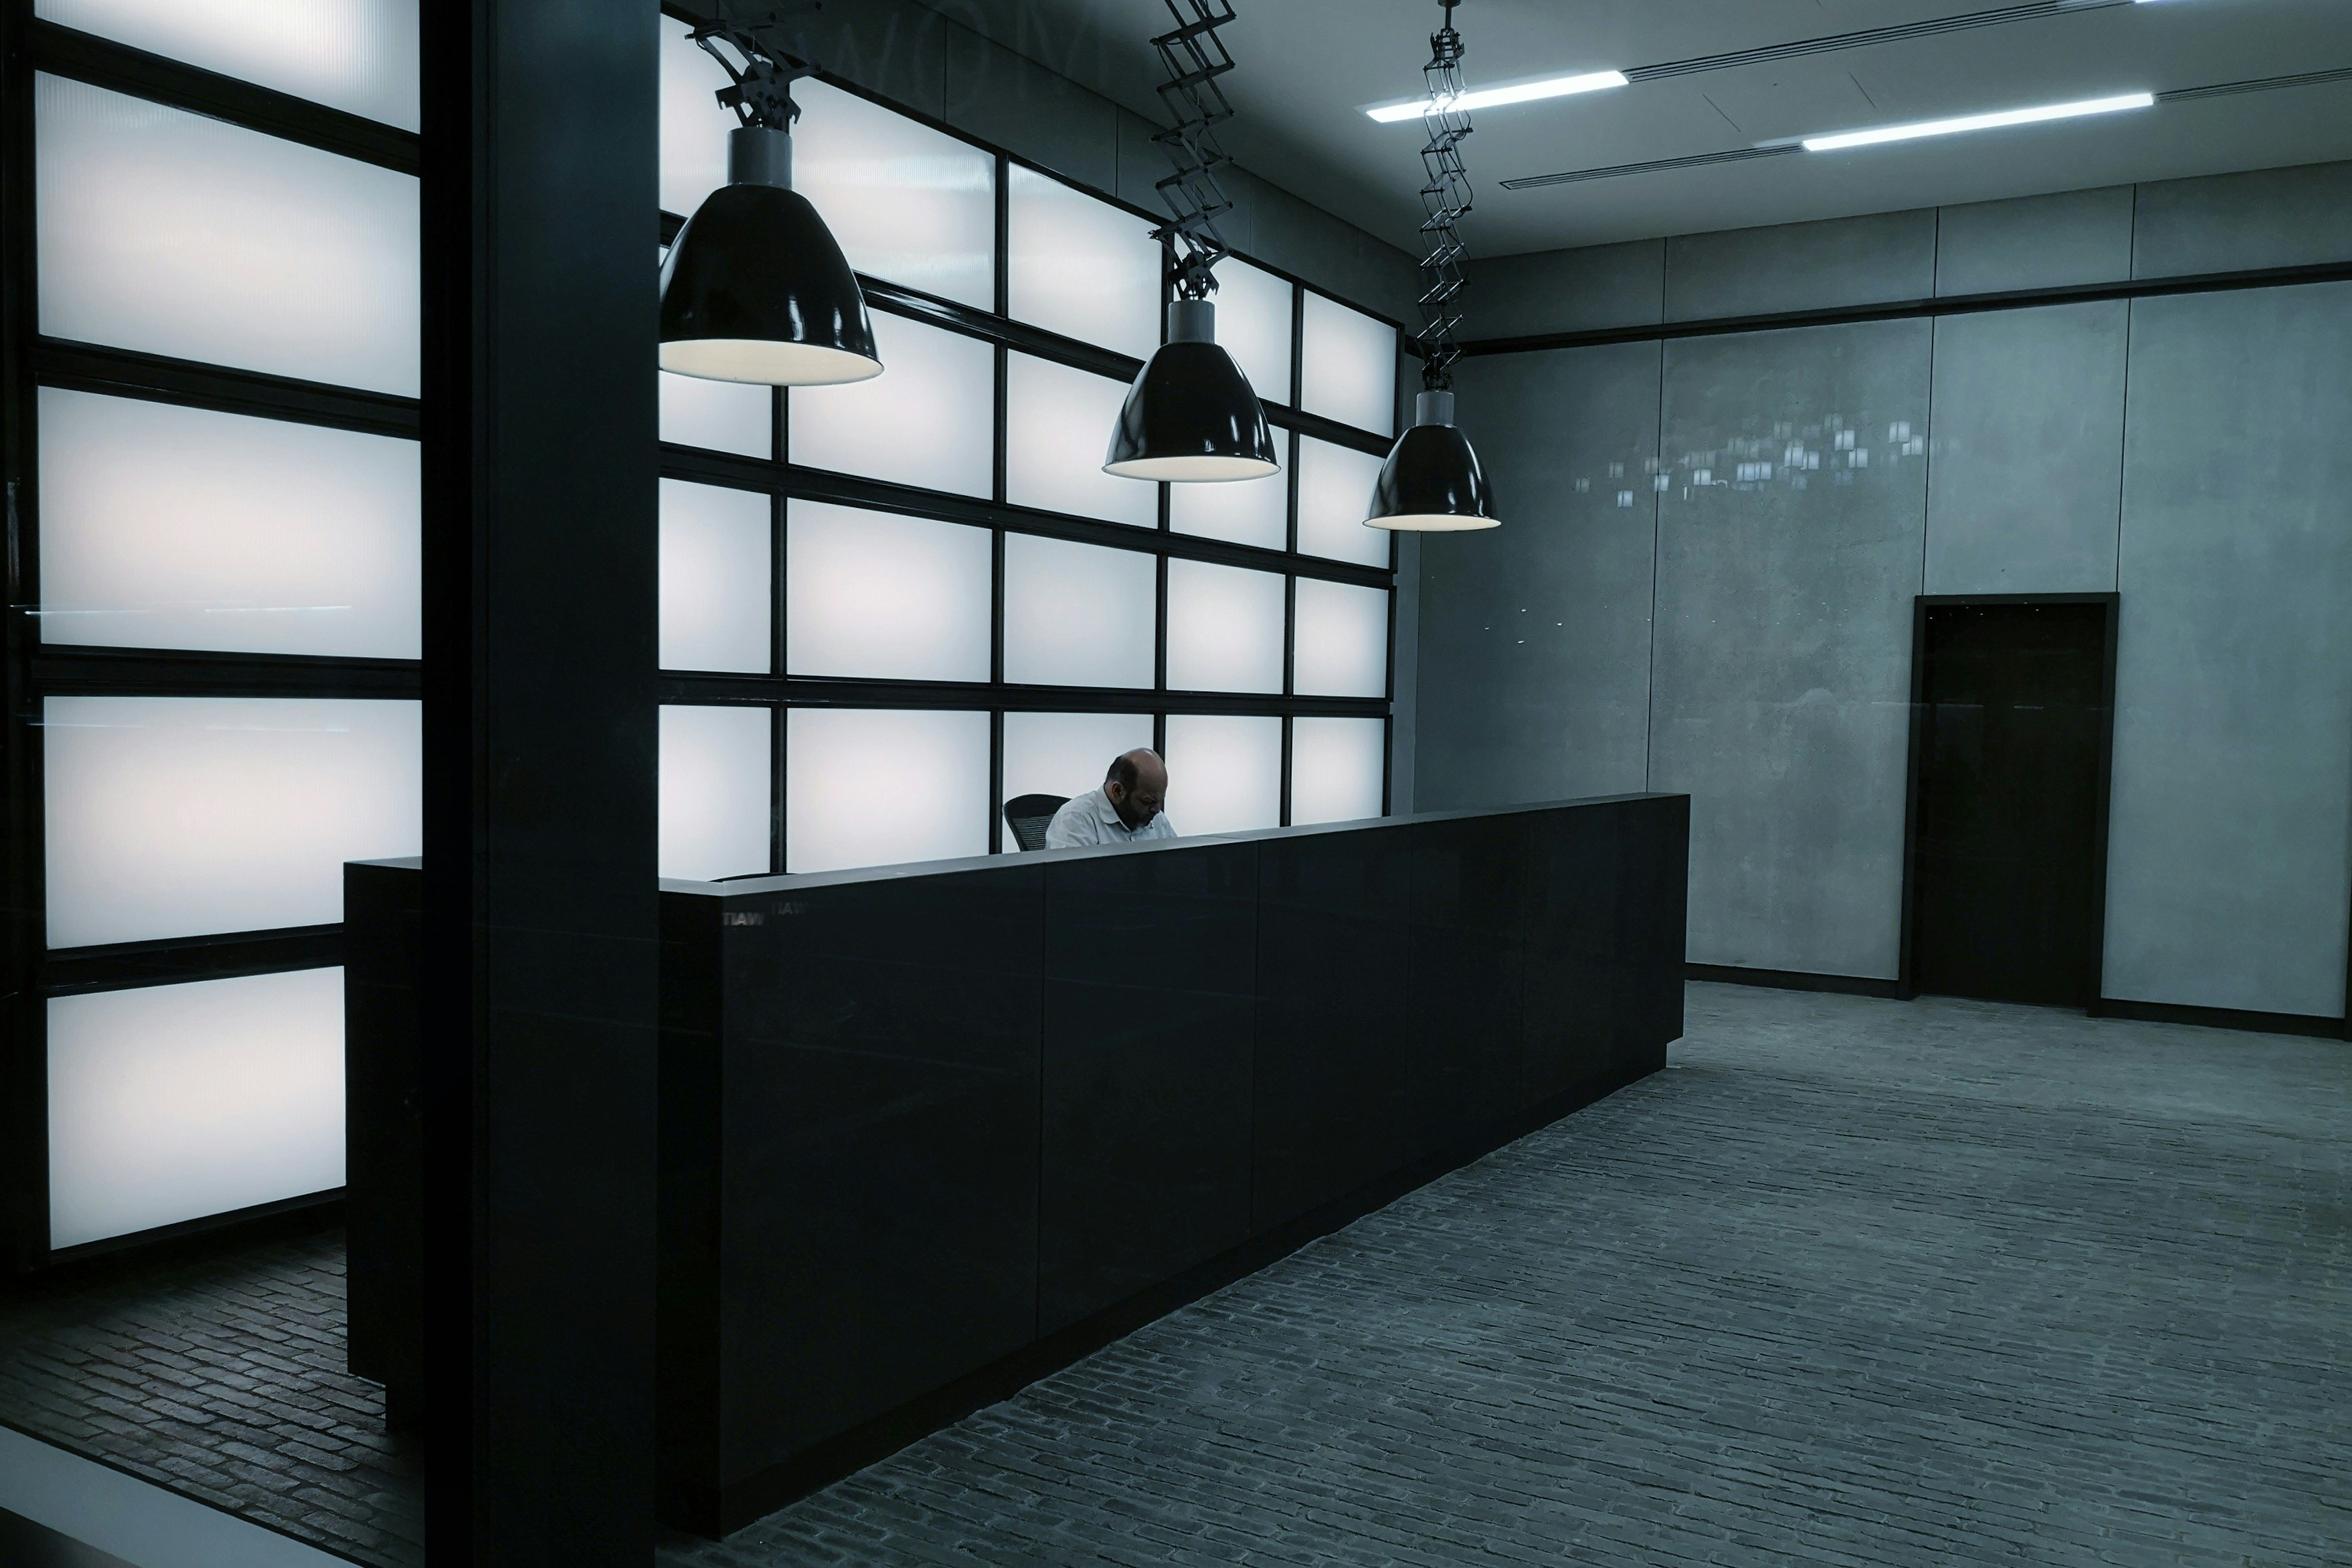 Commercial Accent Lighting in Modern Office Space